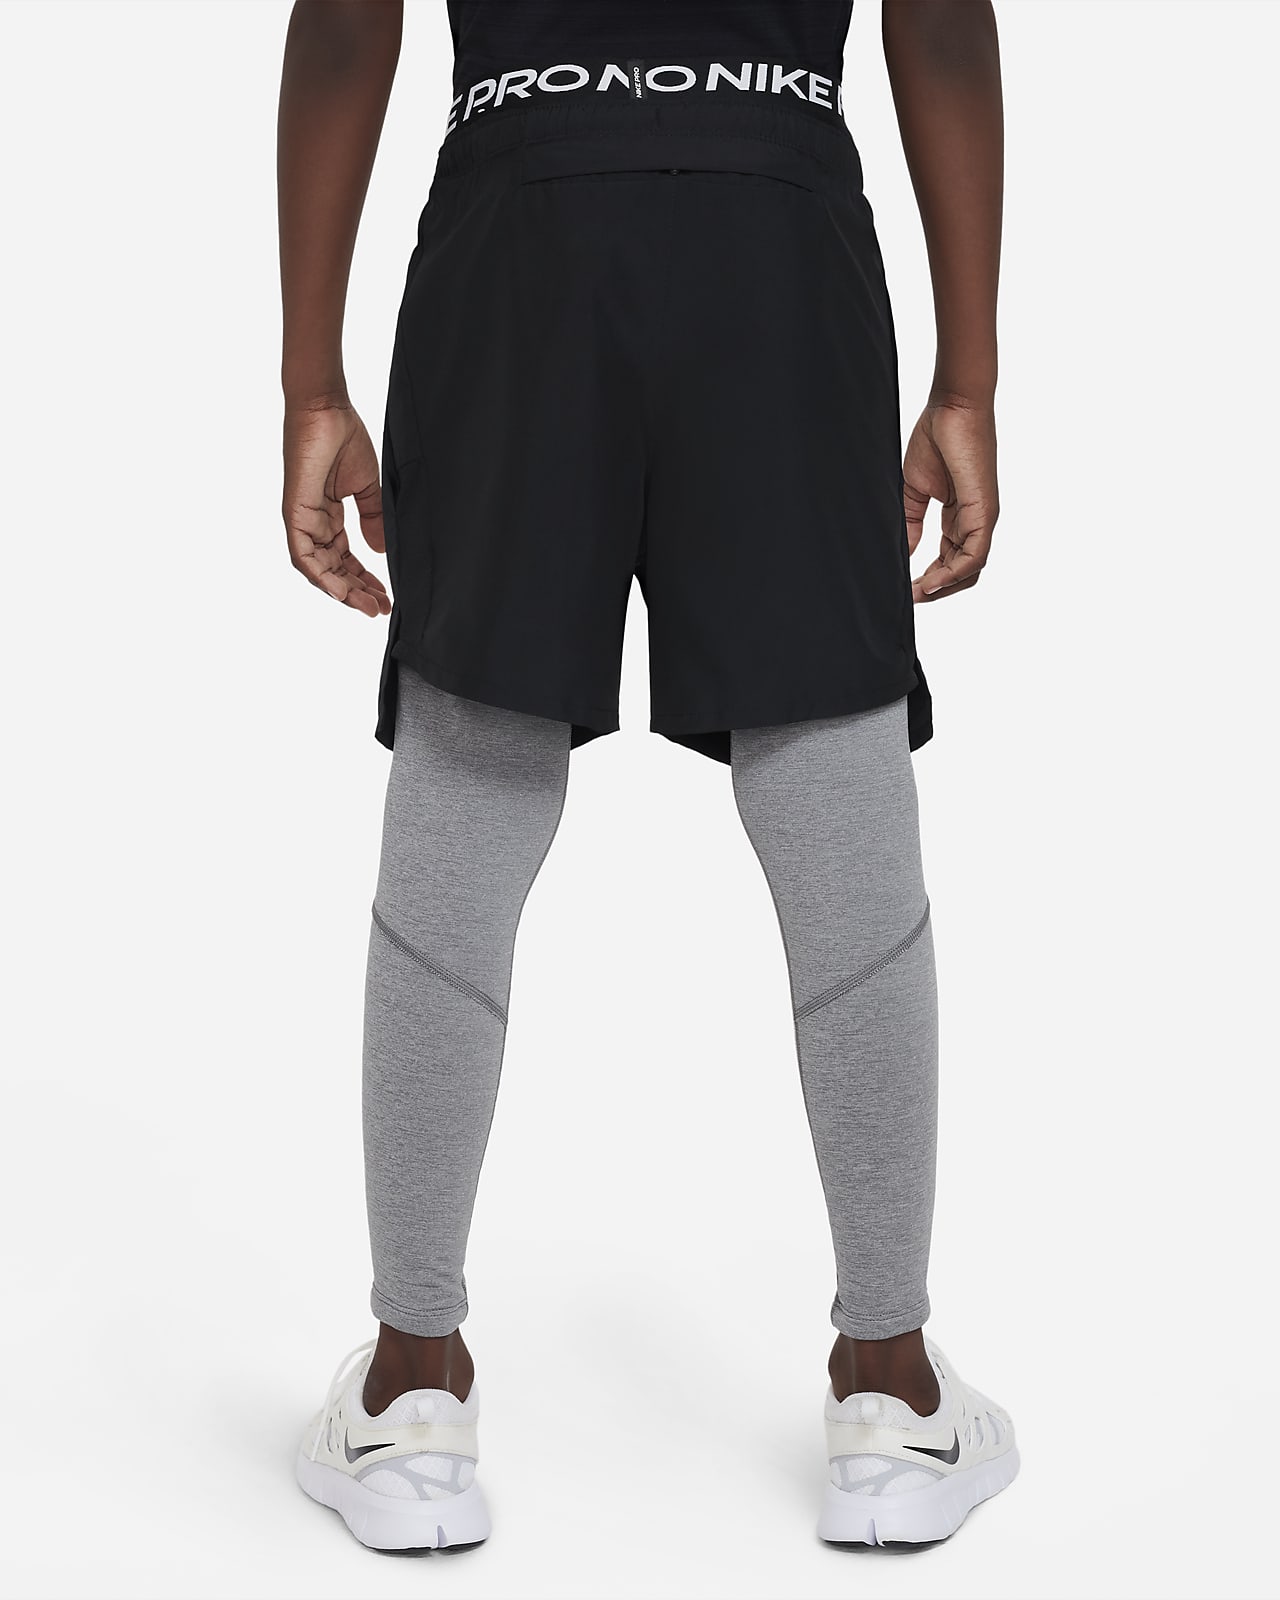 Nike Pro Shorts and Leggings. Find Men's, Women's and Kids' Styles in  Unique Offers